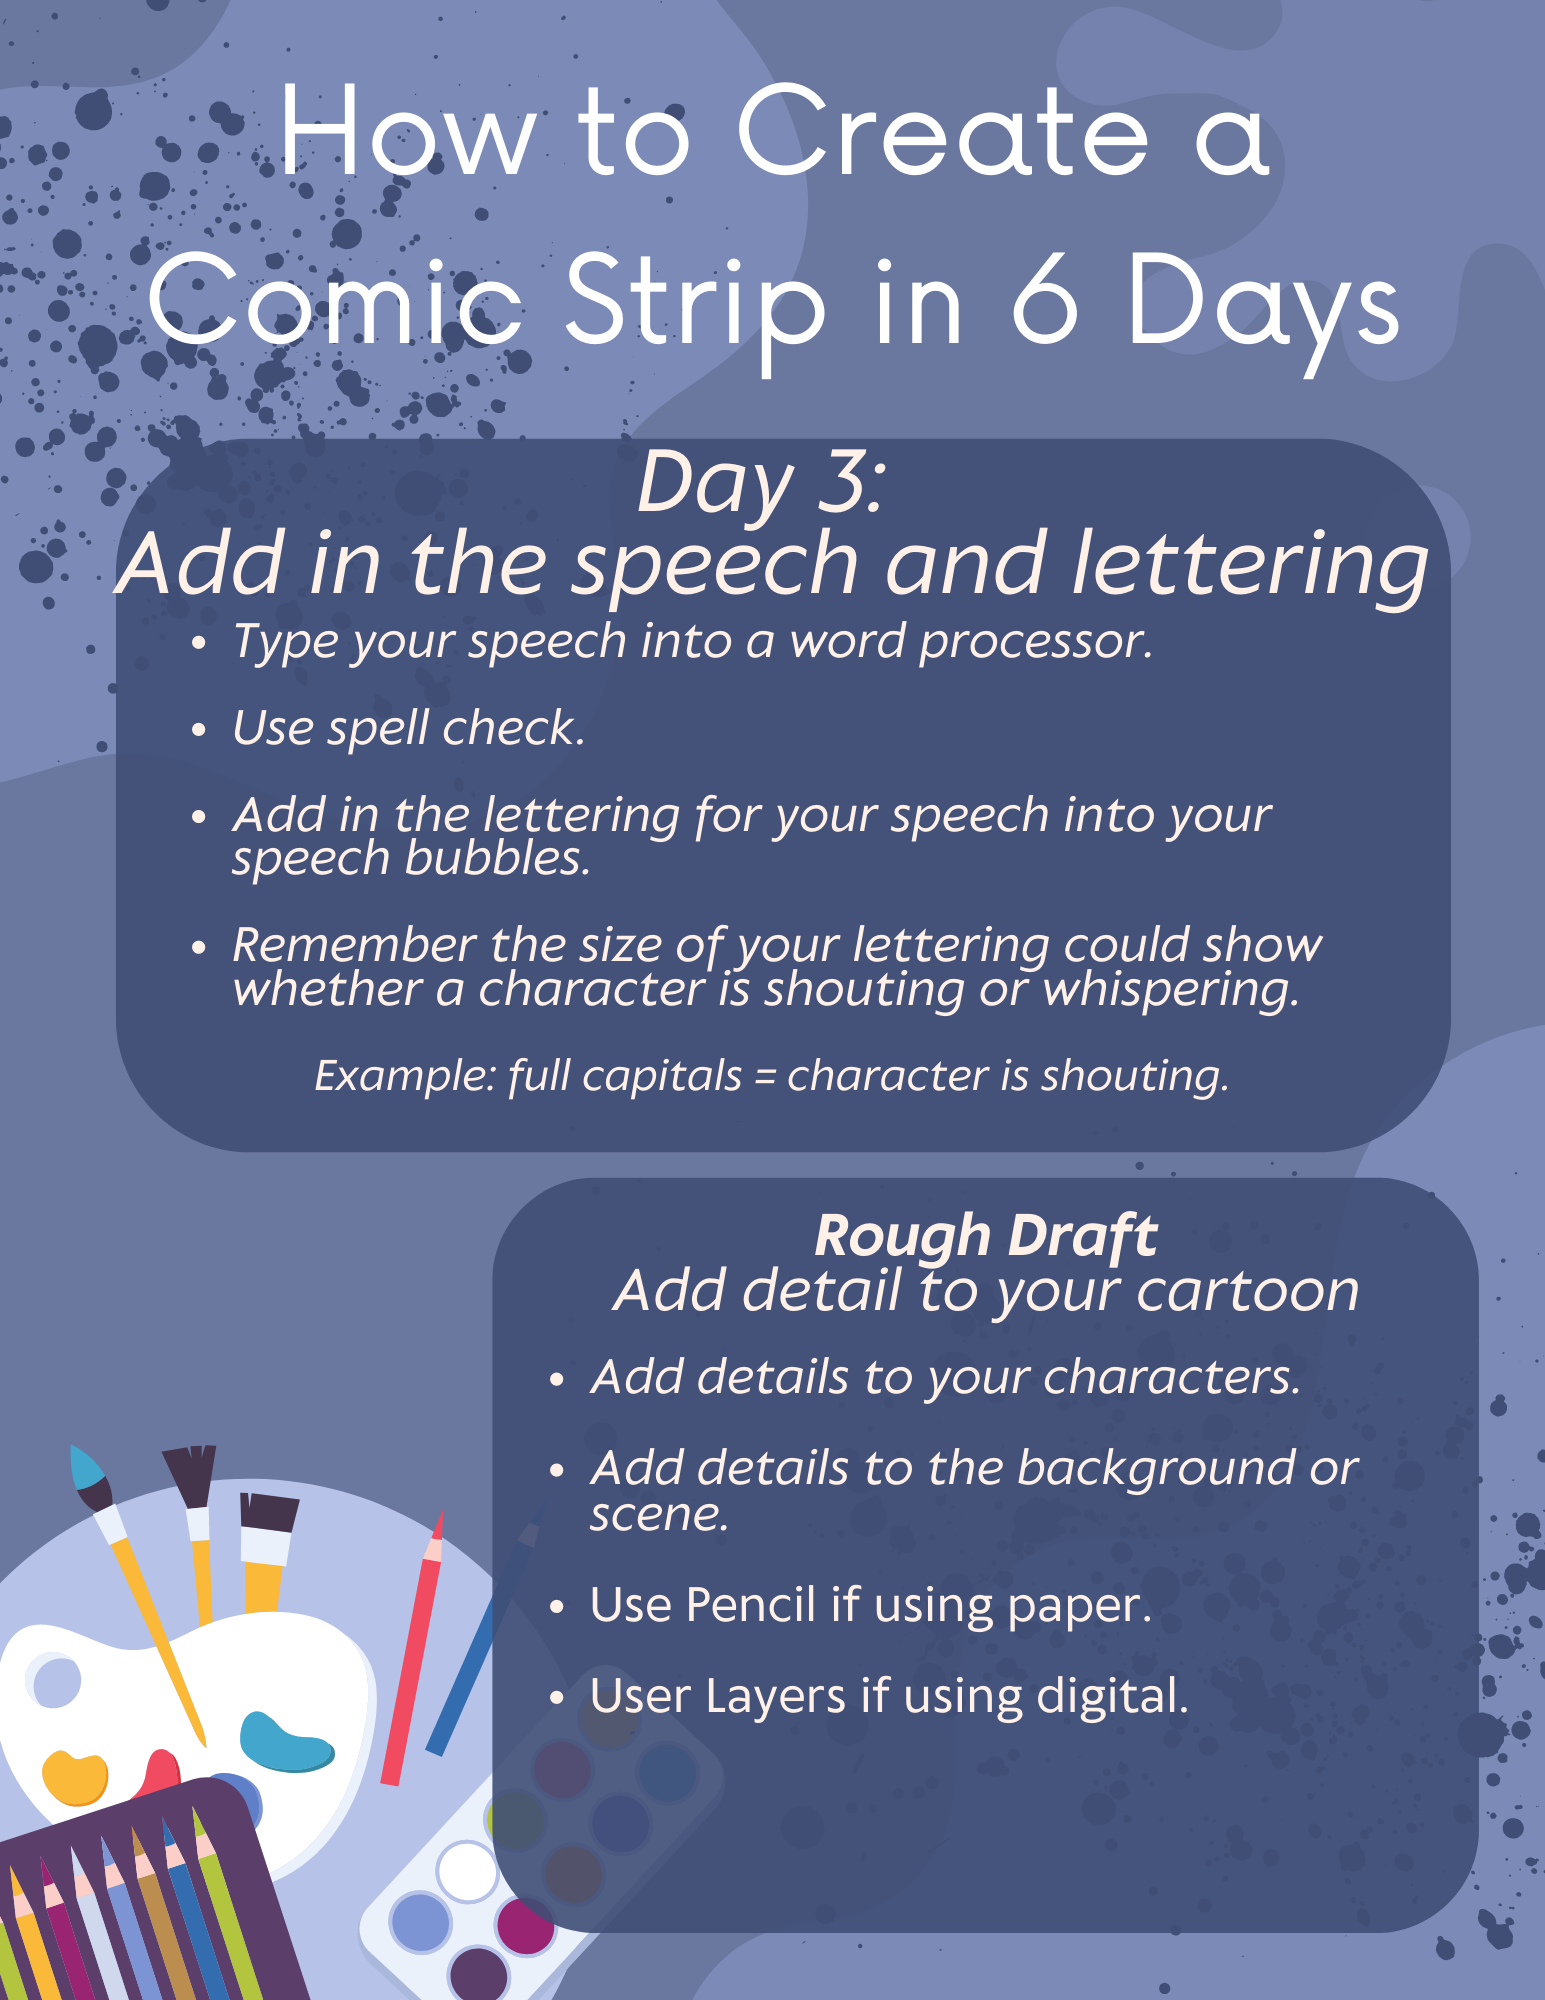 How To Draw A Commic In 6 Days.